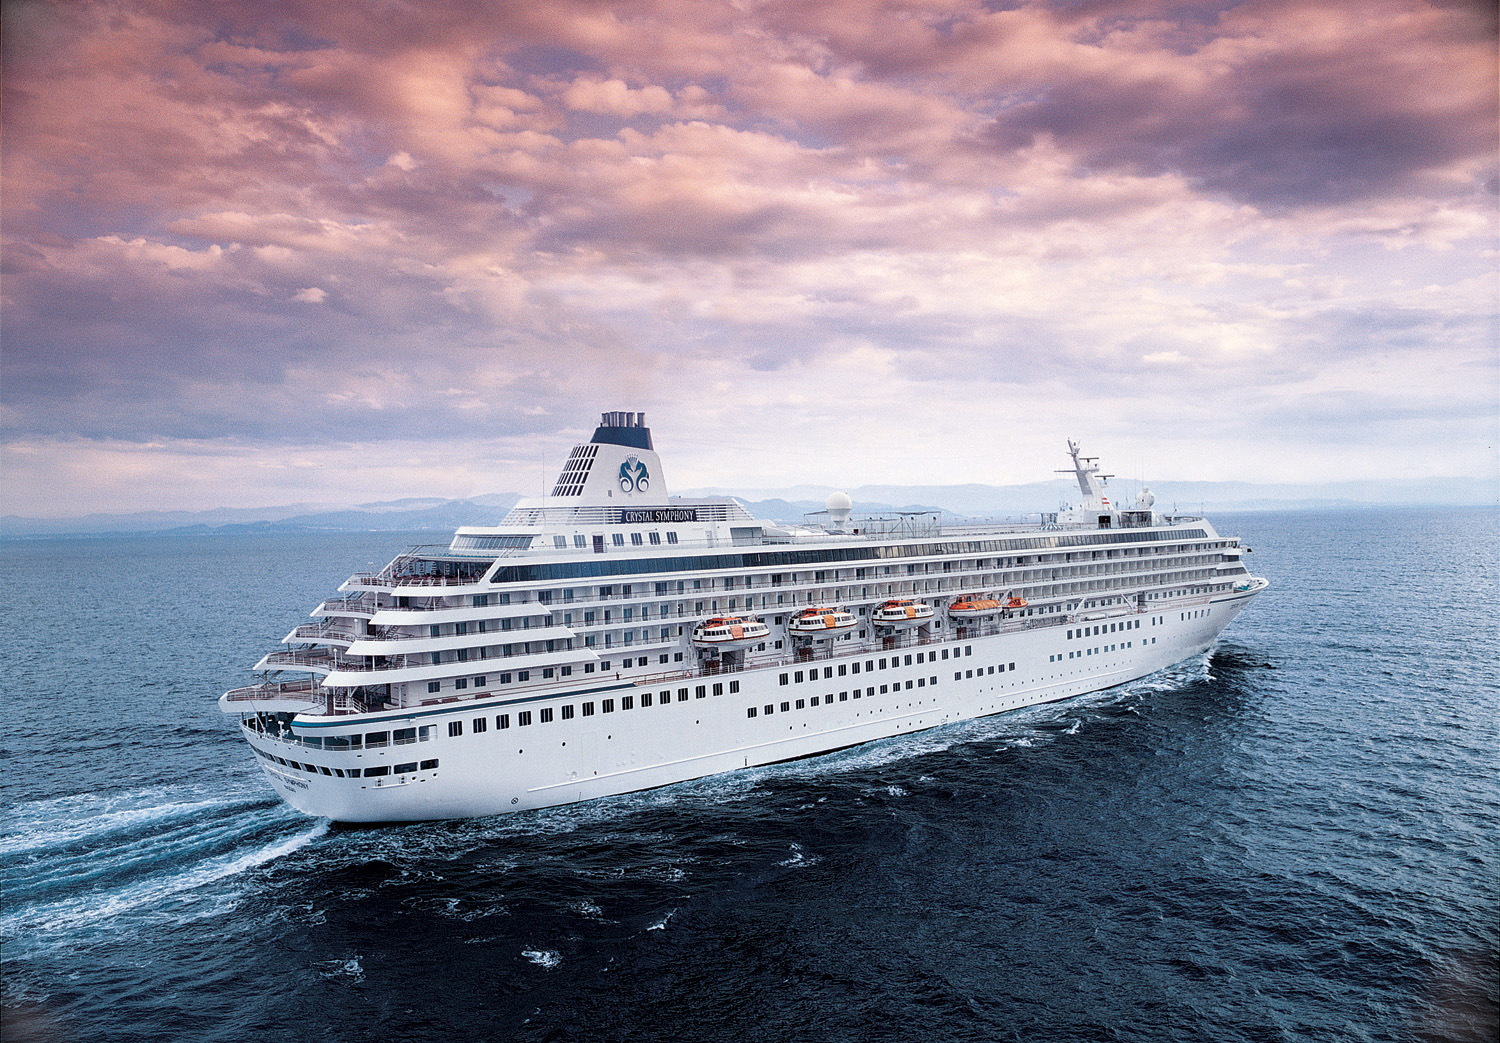 Common misconceptions of cruising